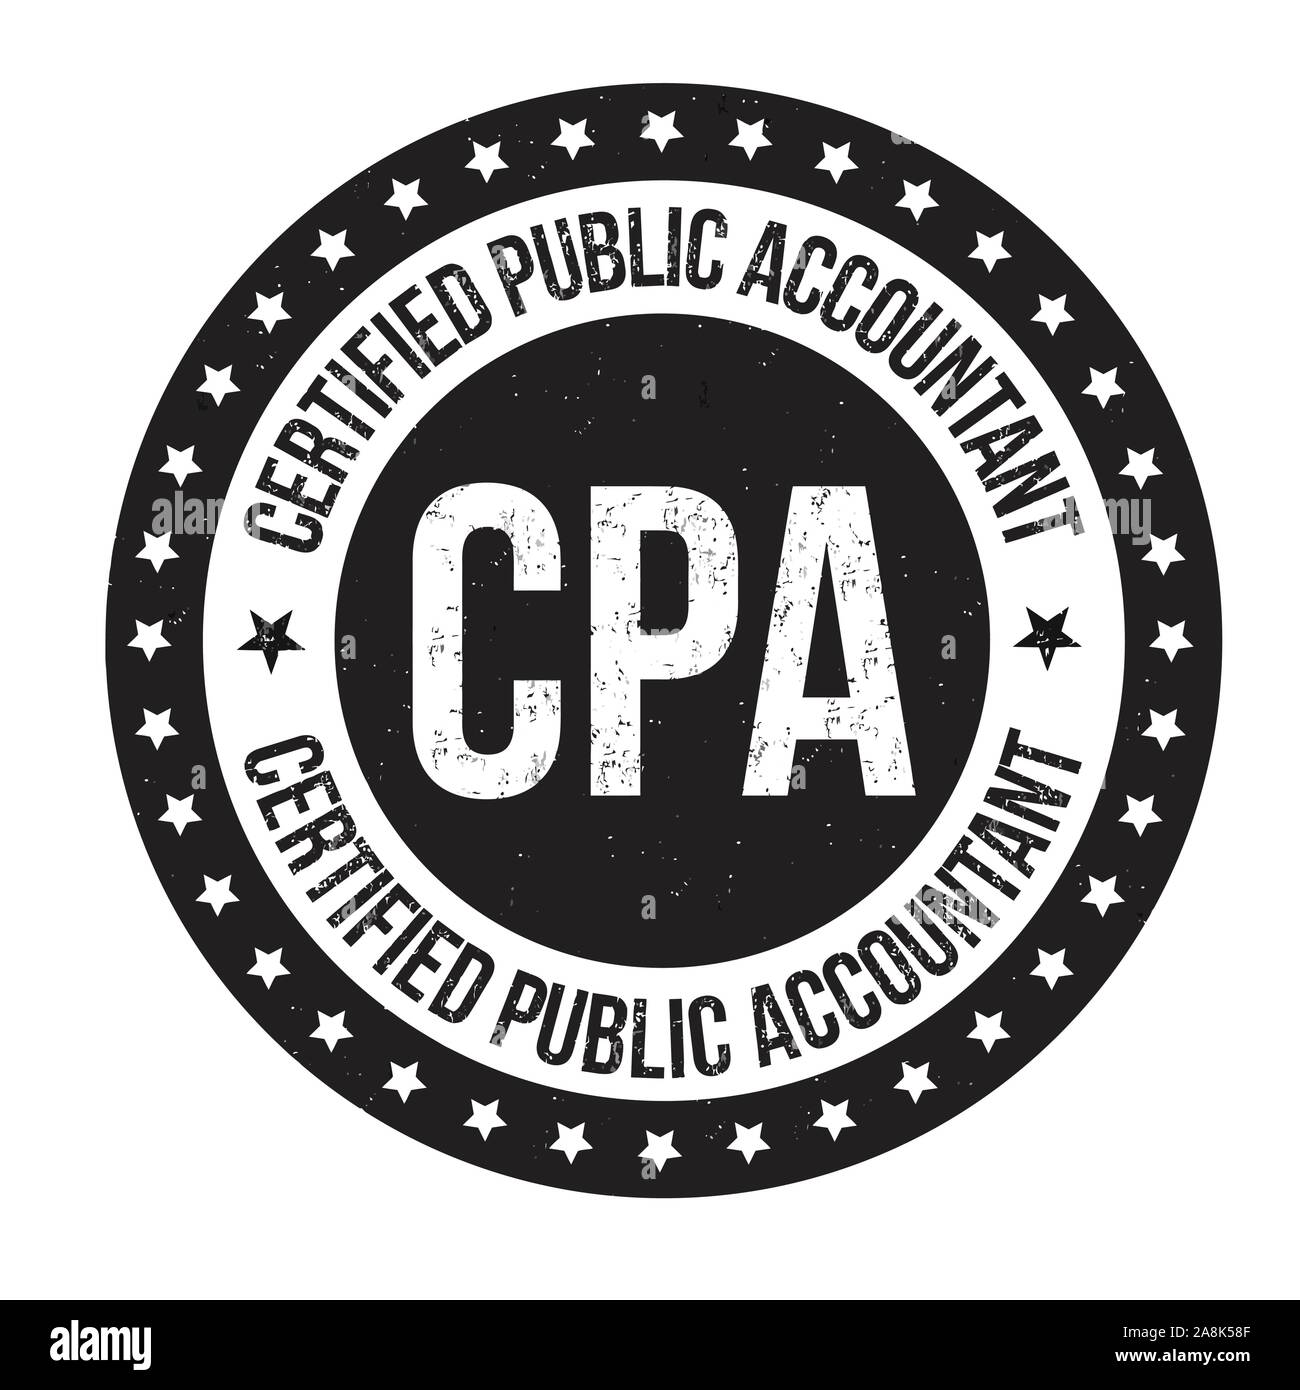 Cpa: What Is A Certified Public Accountant